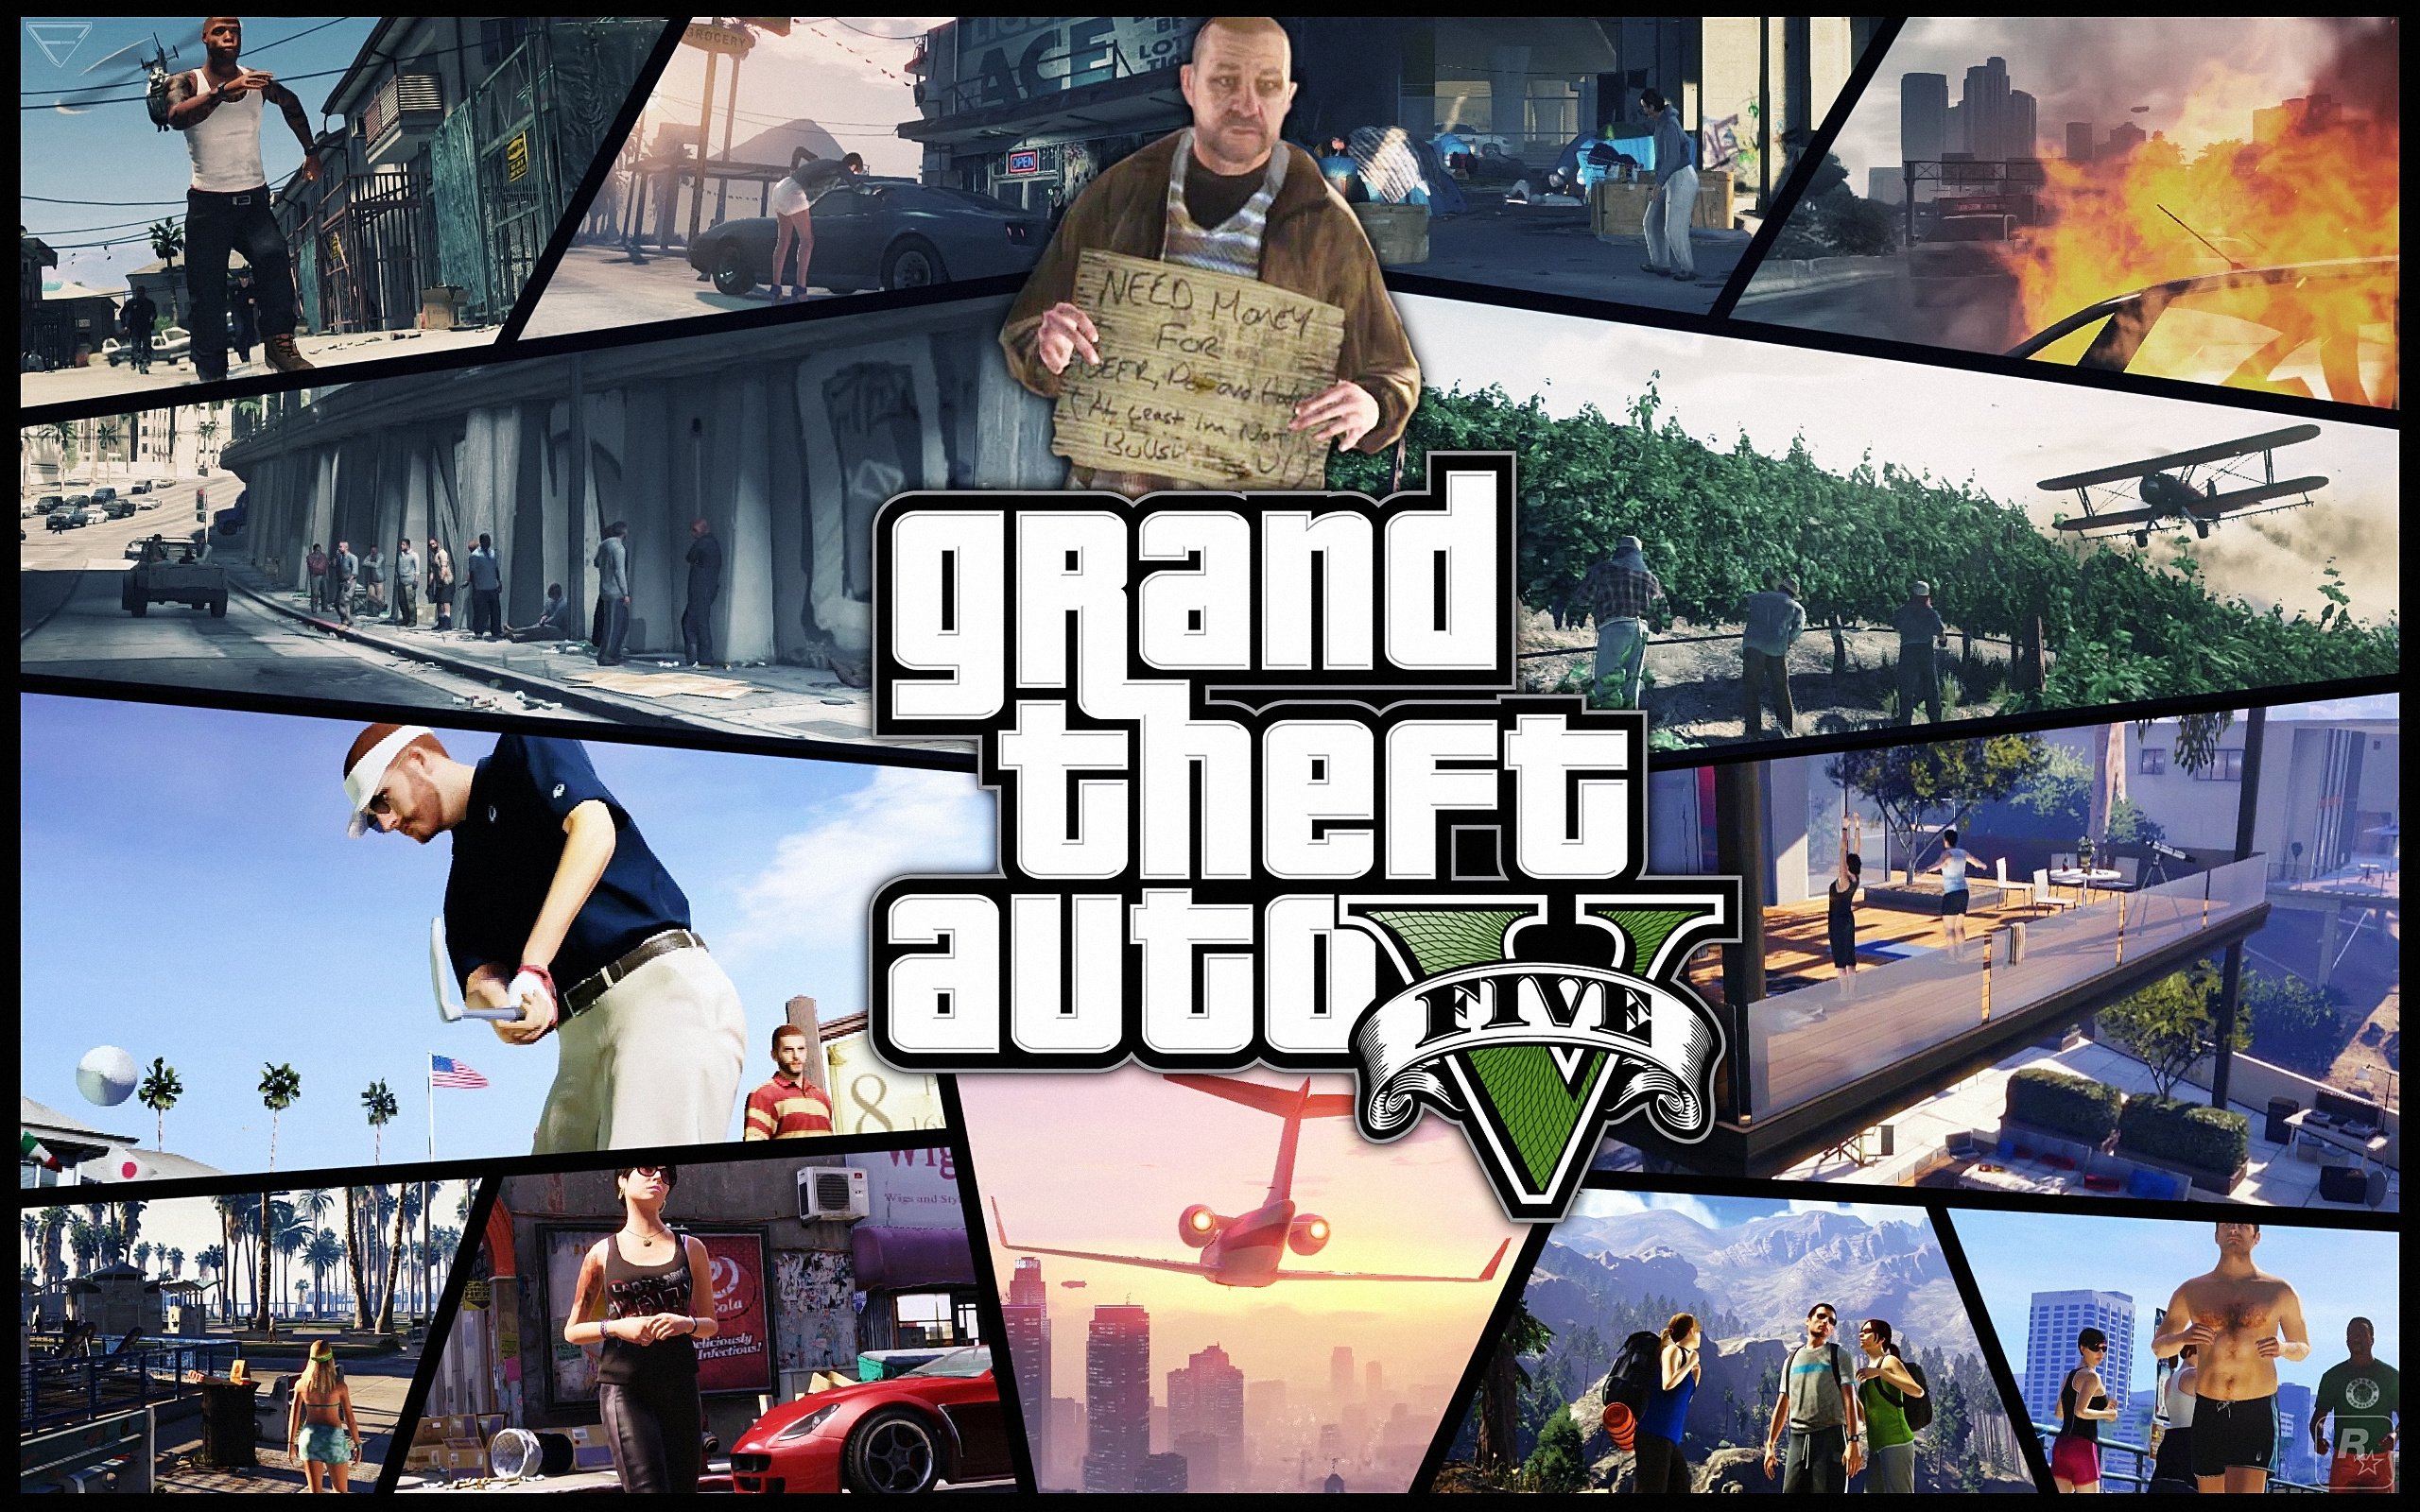 Download GTA V. FREE FOR ONLY 2 WEEKS. DOWNLOAD NOW